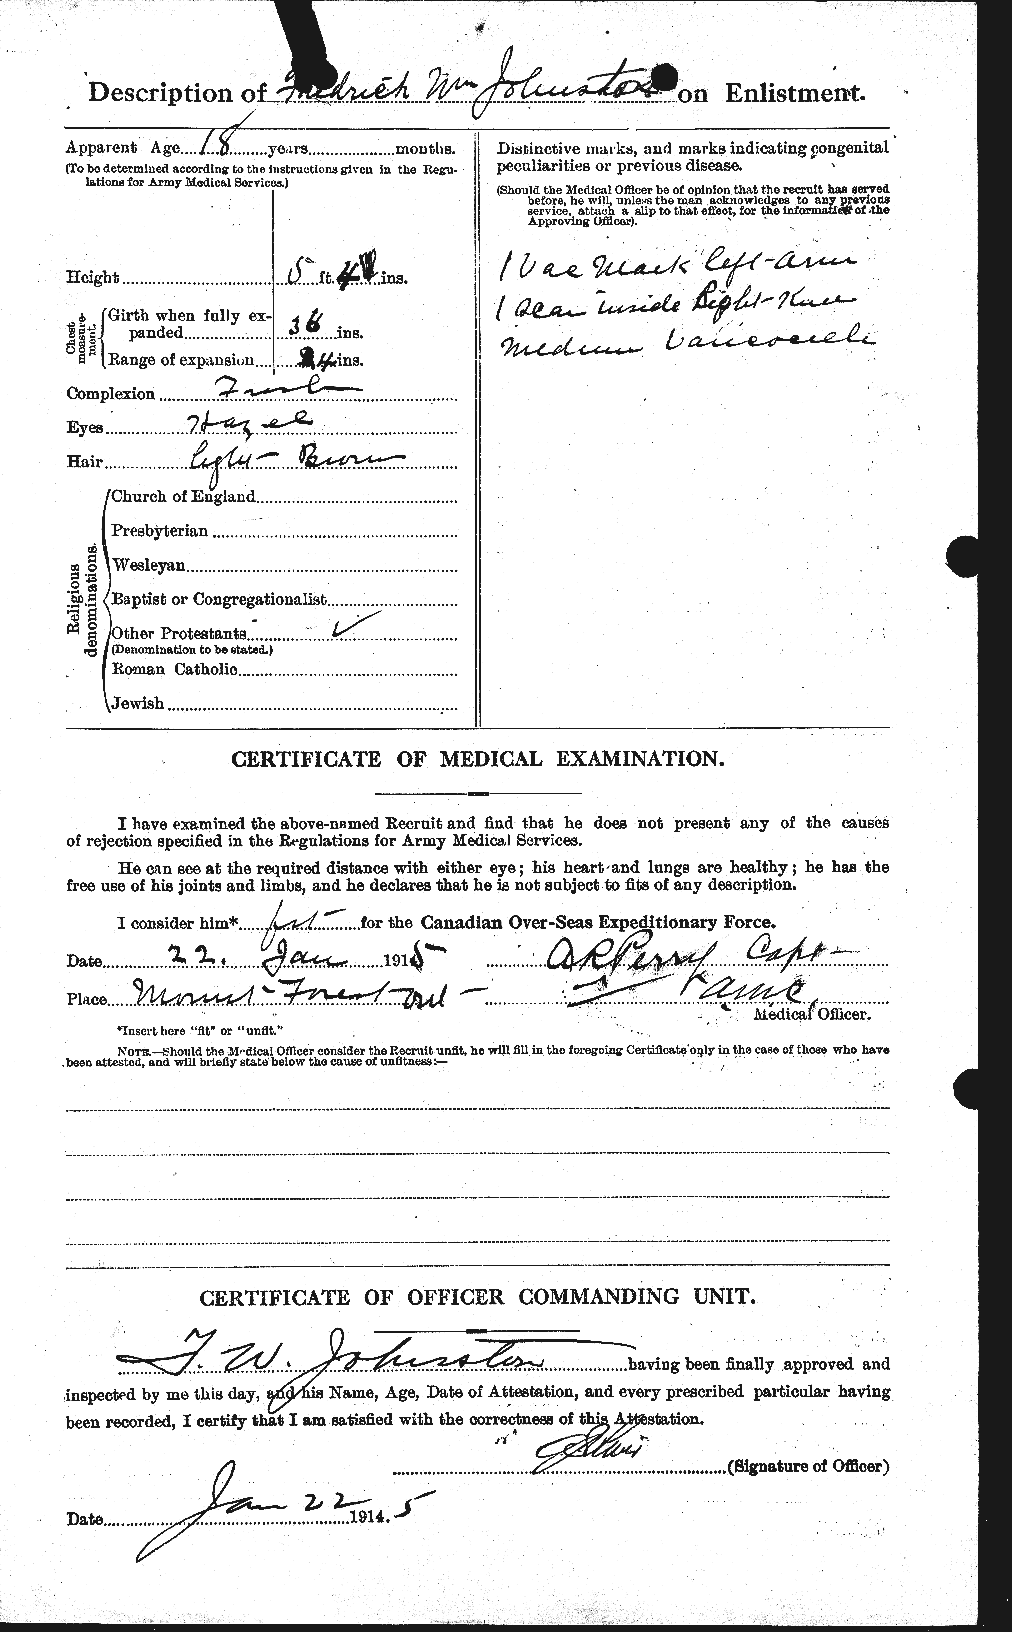 Personnel Records of the First World War - CEF 423308b